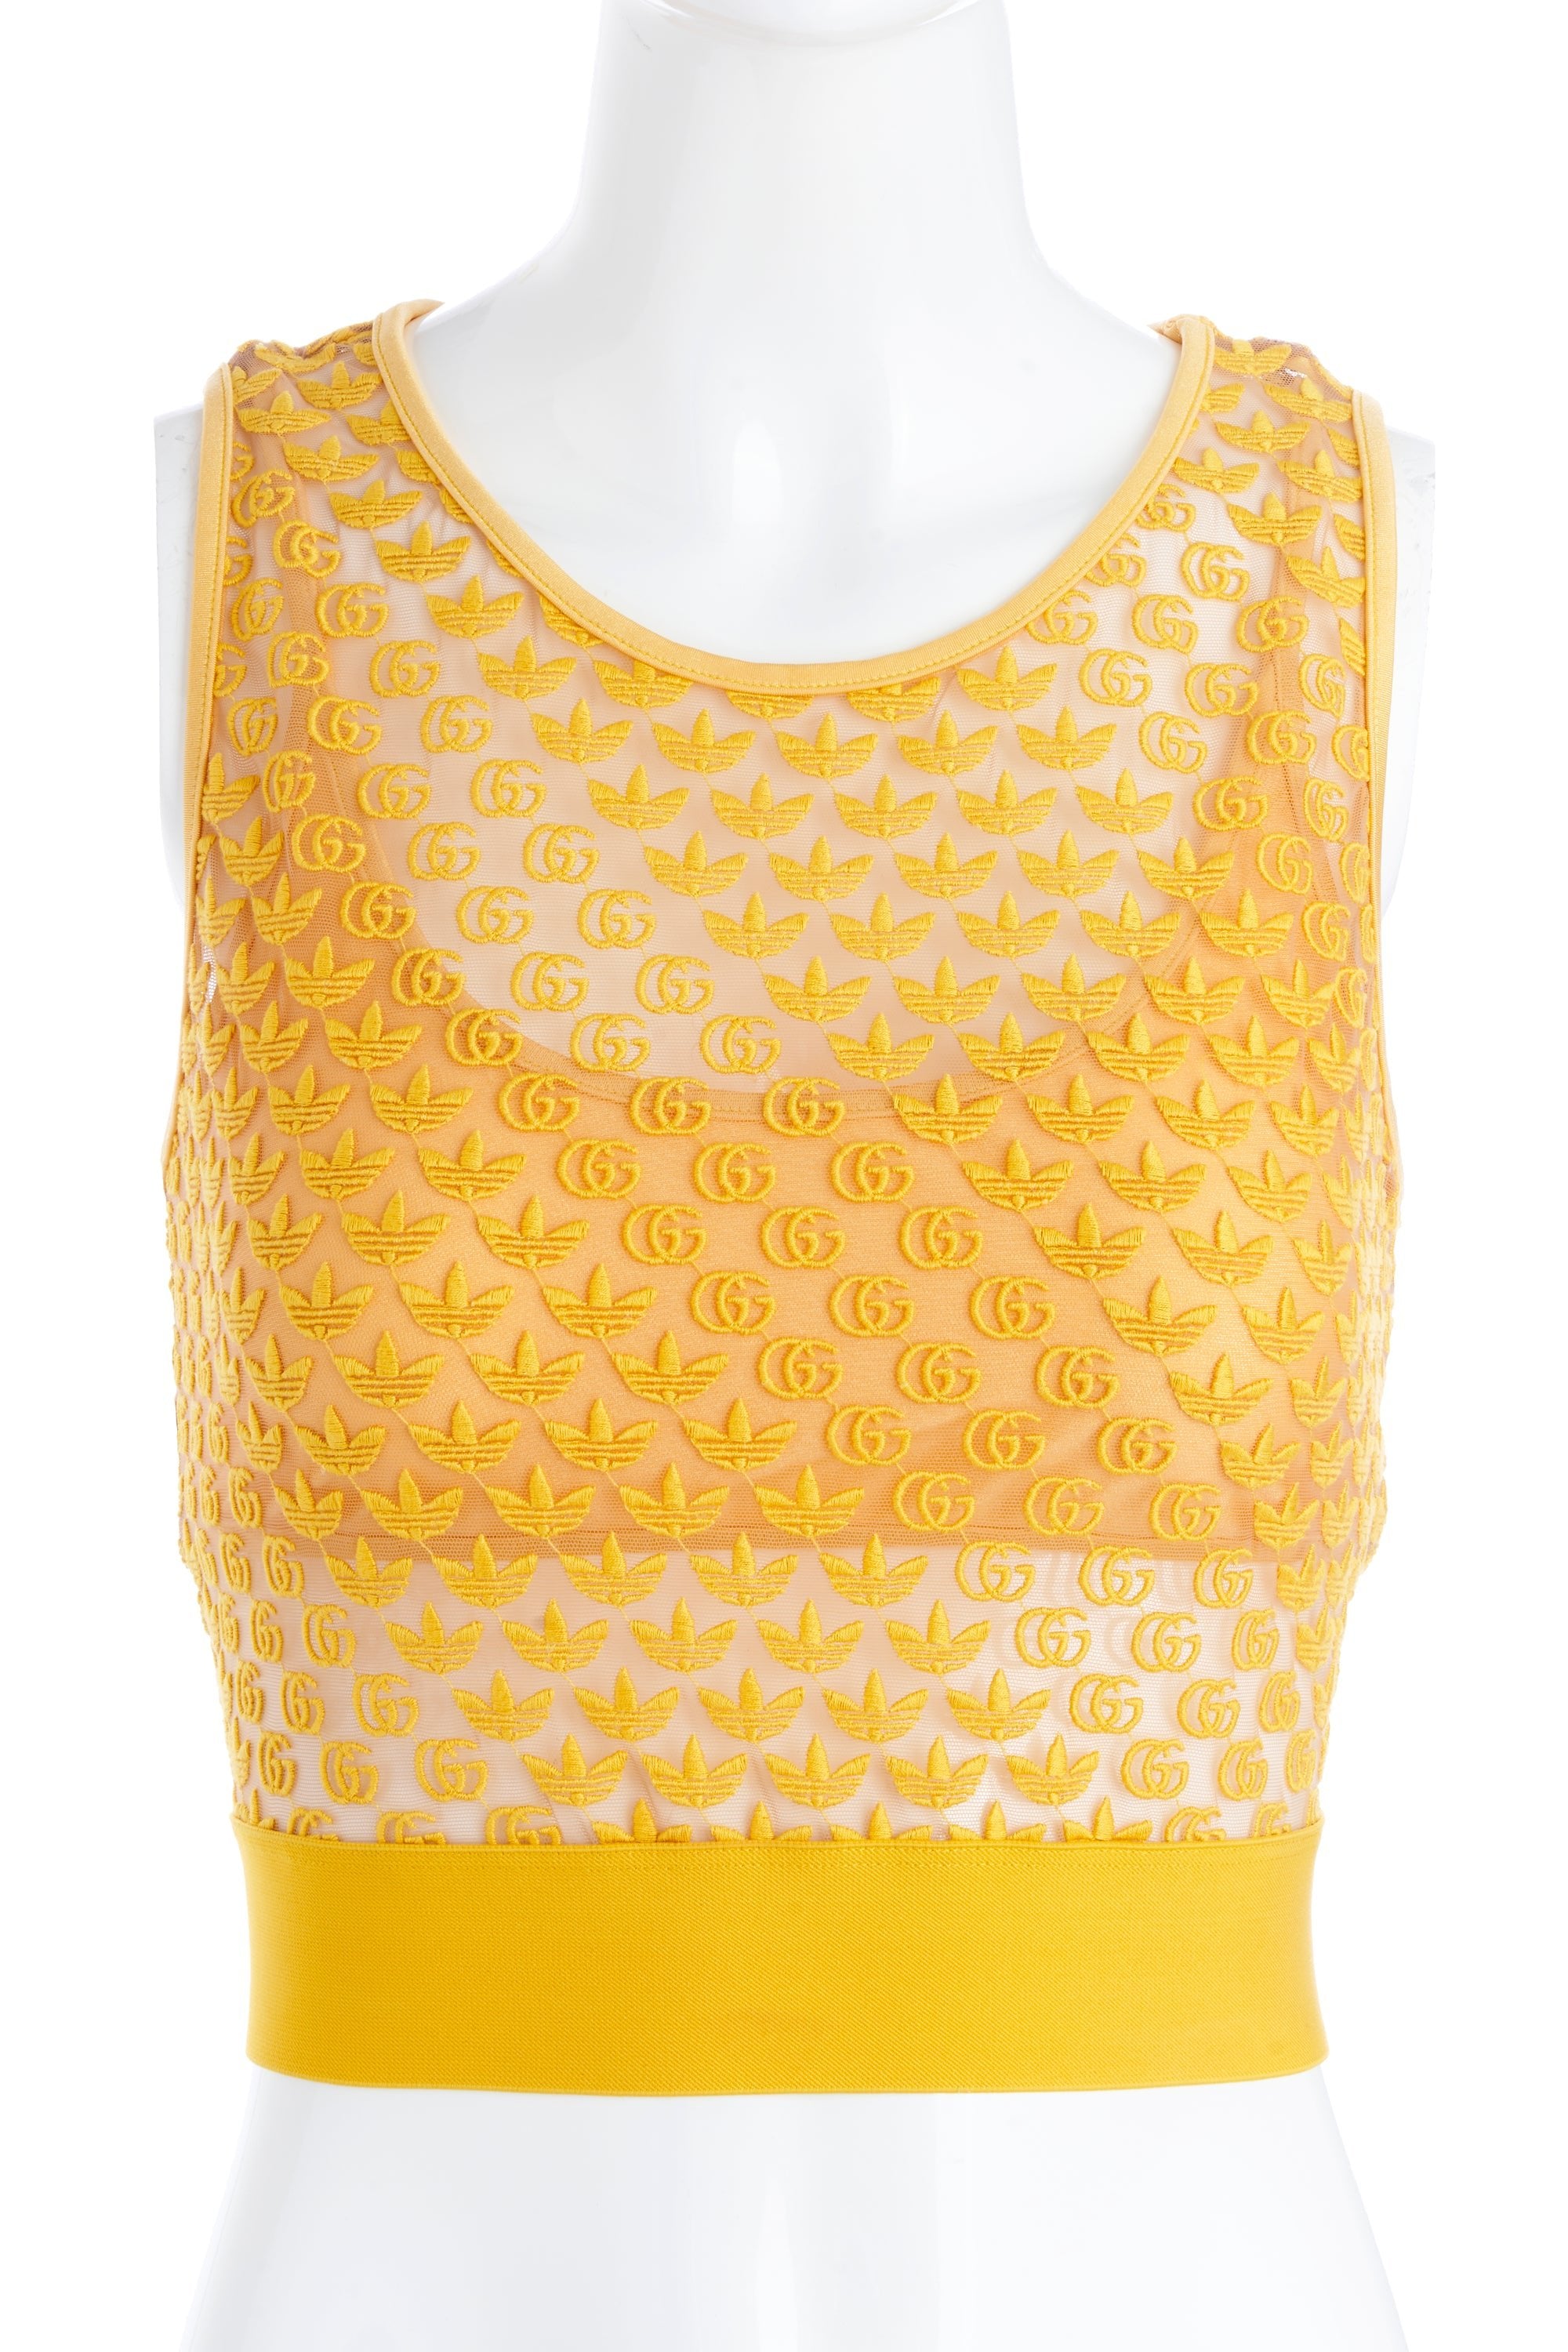 Gucci x Adidas Yellow Sport Top - Foxy Couture Carmel